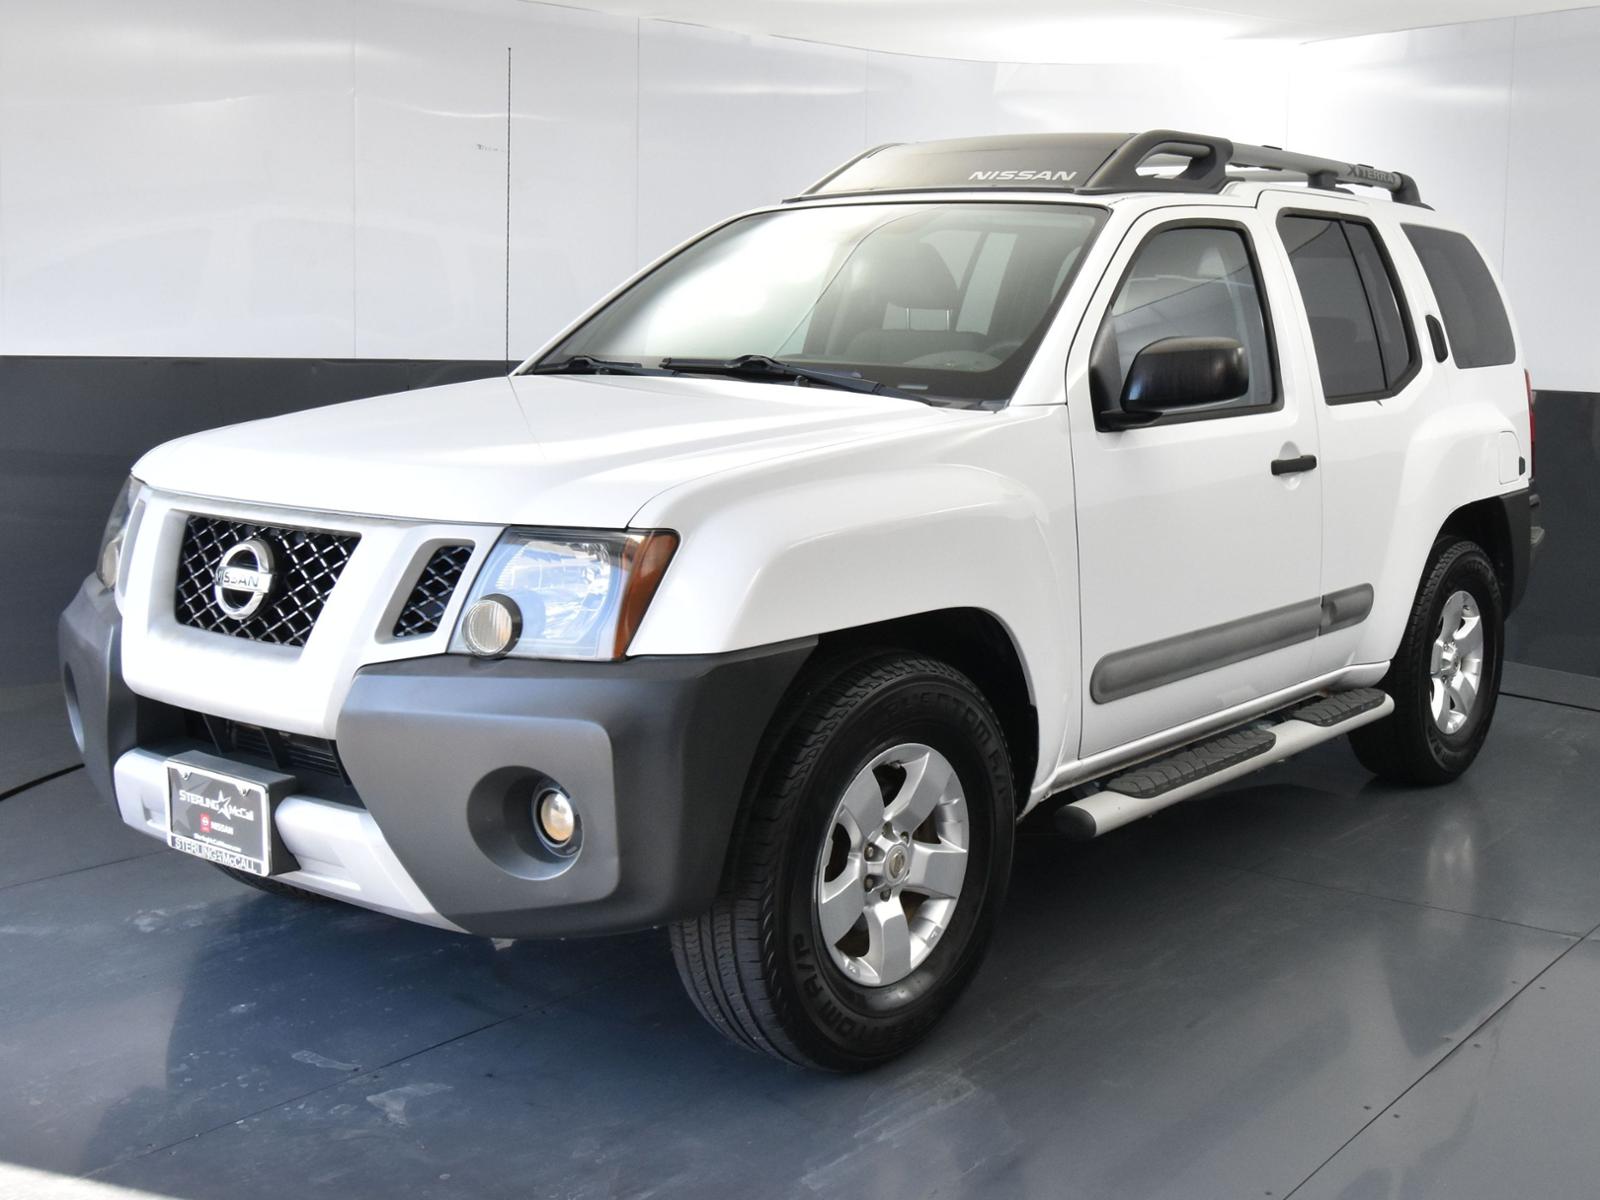 Pre-Owned 2011 Nissan Xterra 2WD 4dr Auto S Sport Utility in Houston  #BC518671 | Sterling McCall Lexus